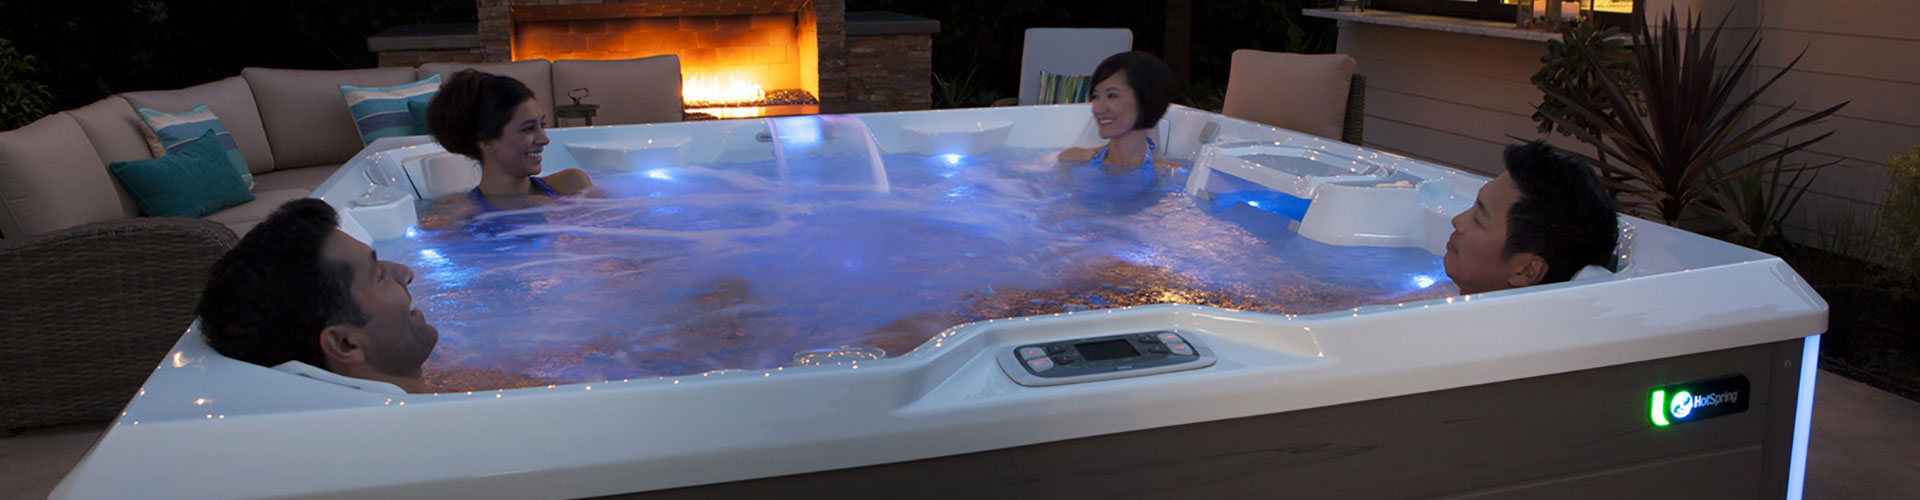 Soak Your Way to Happiness in a Portable Spa, Hot Tub Store Milwaukee